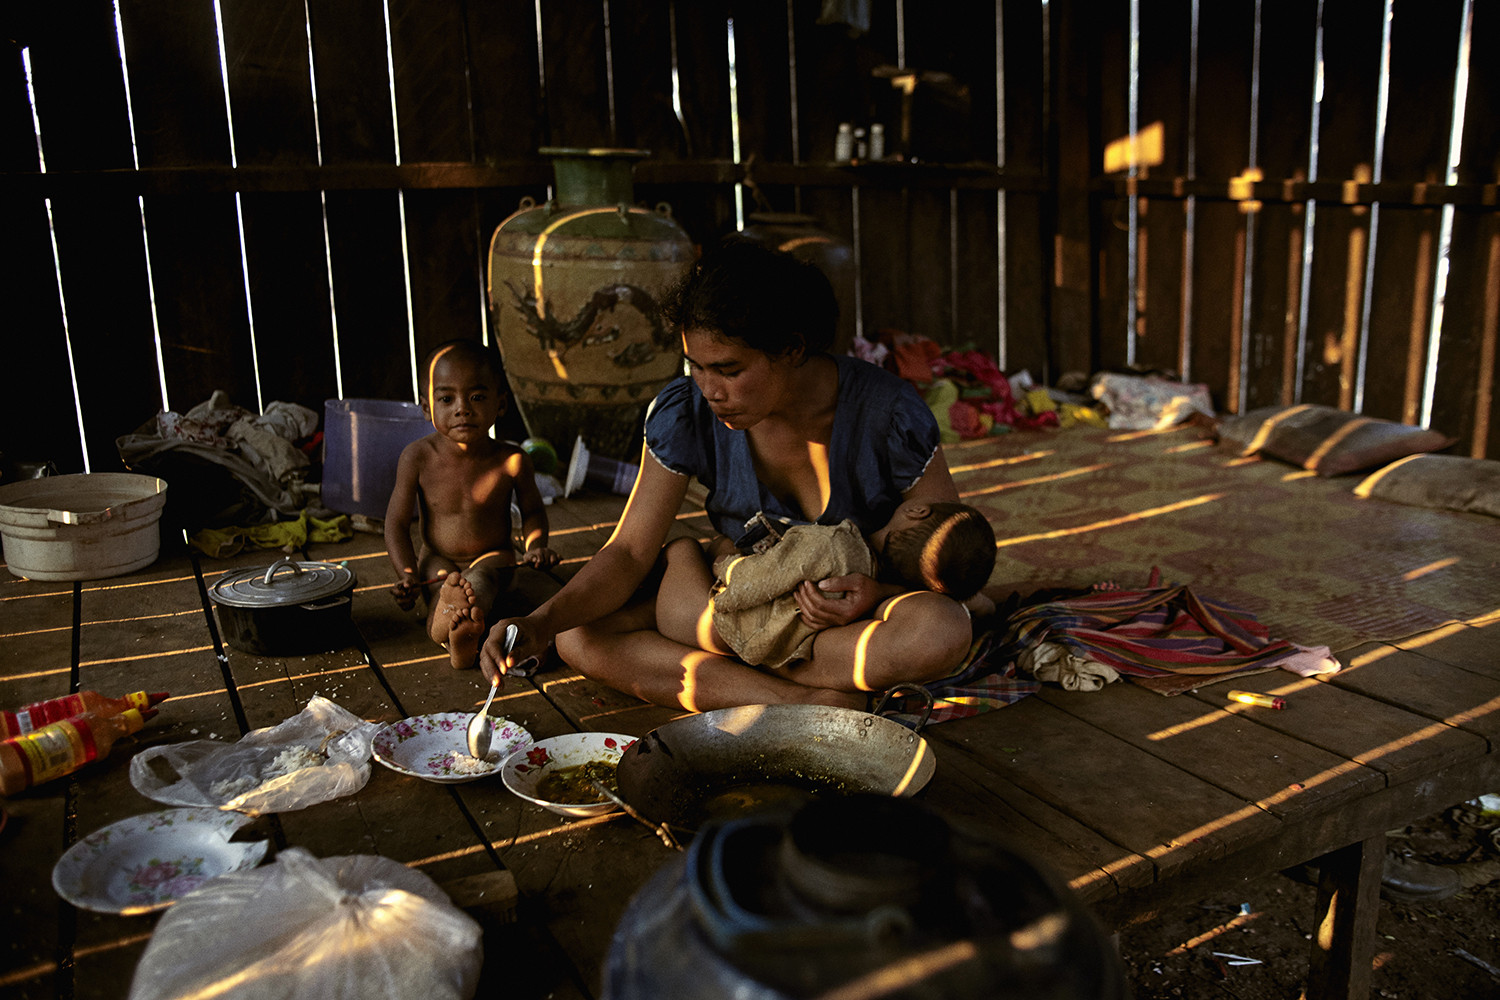 A mother has a baby on her lap and another young child besides her in a hut in Cambodia, she is feeding her sons some food.